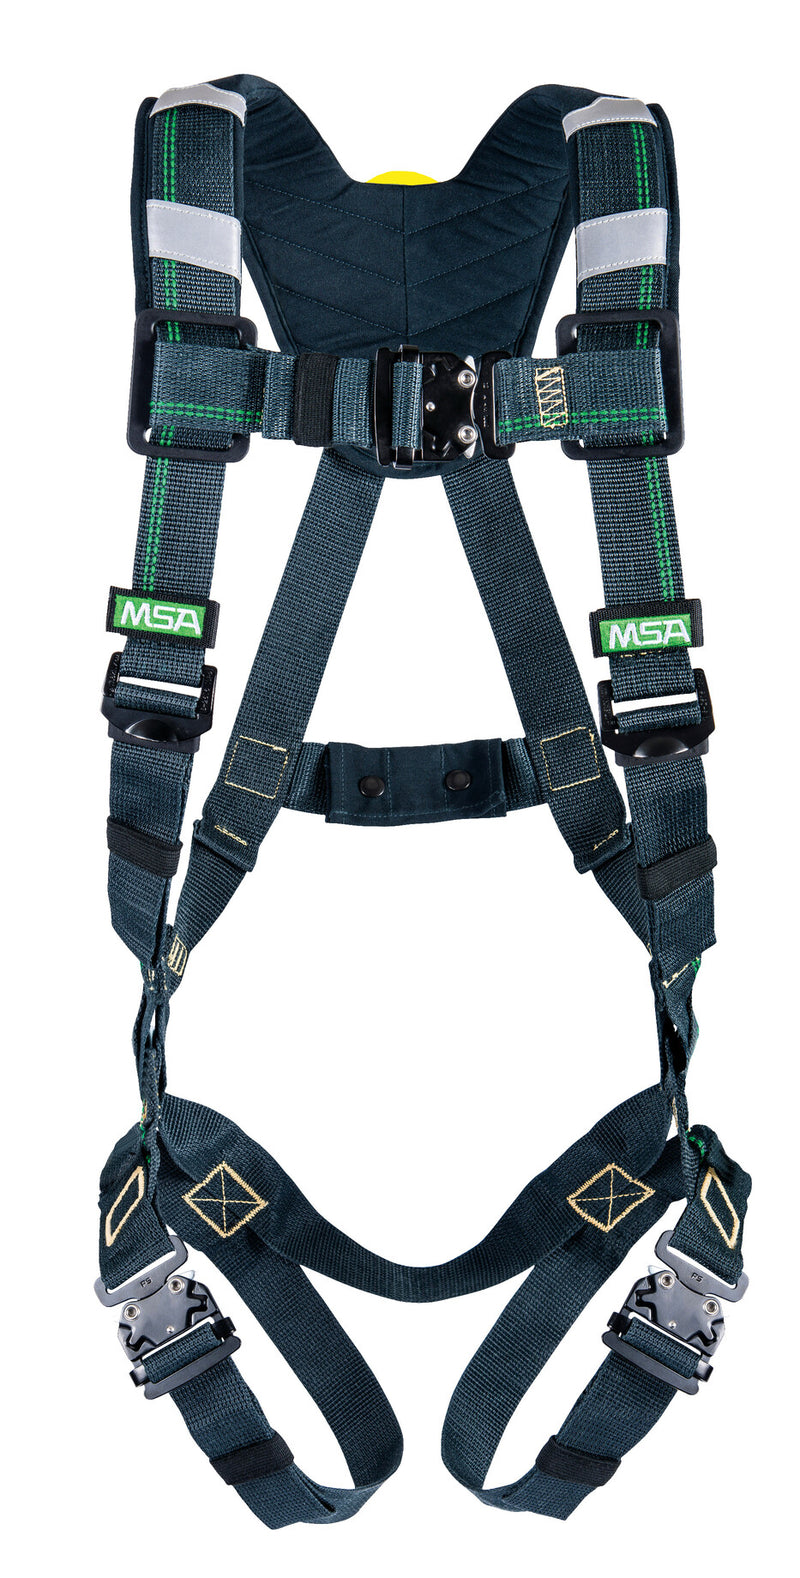 EVOTECH Arc Flash Harness, Fall Protection Harness With Shoulder Padding